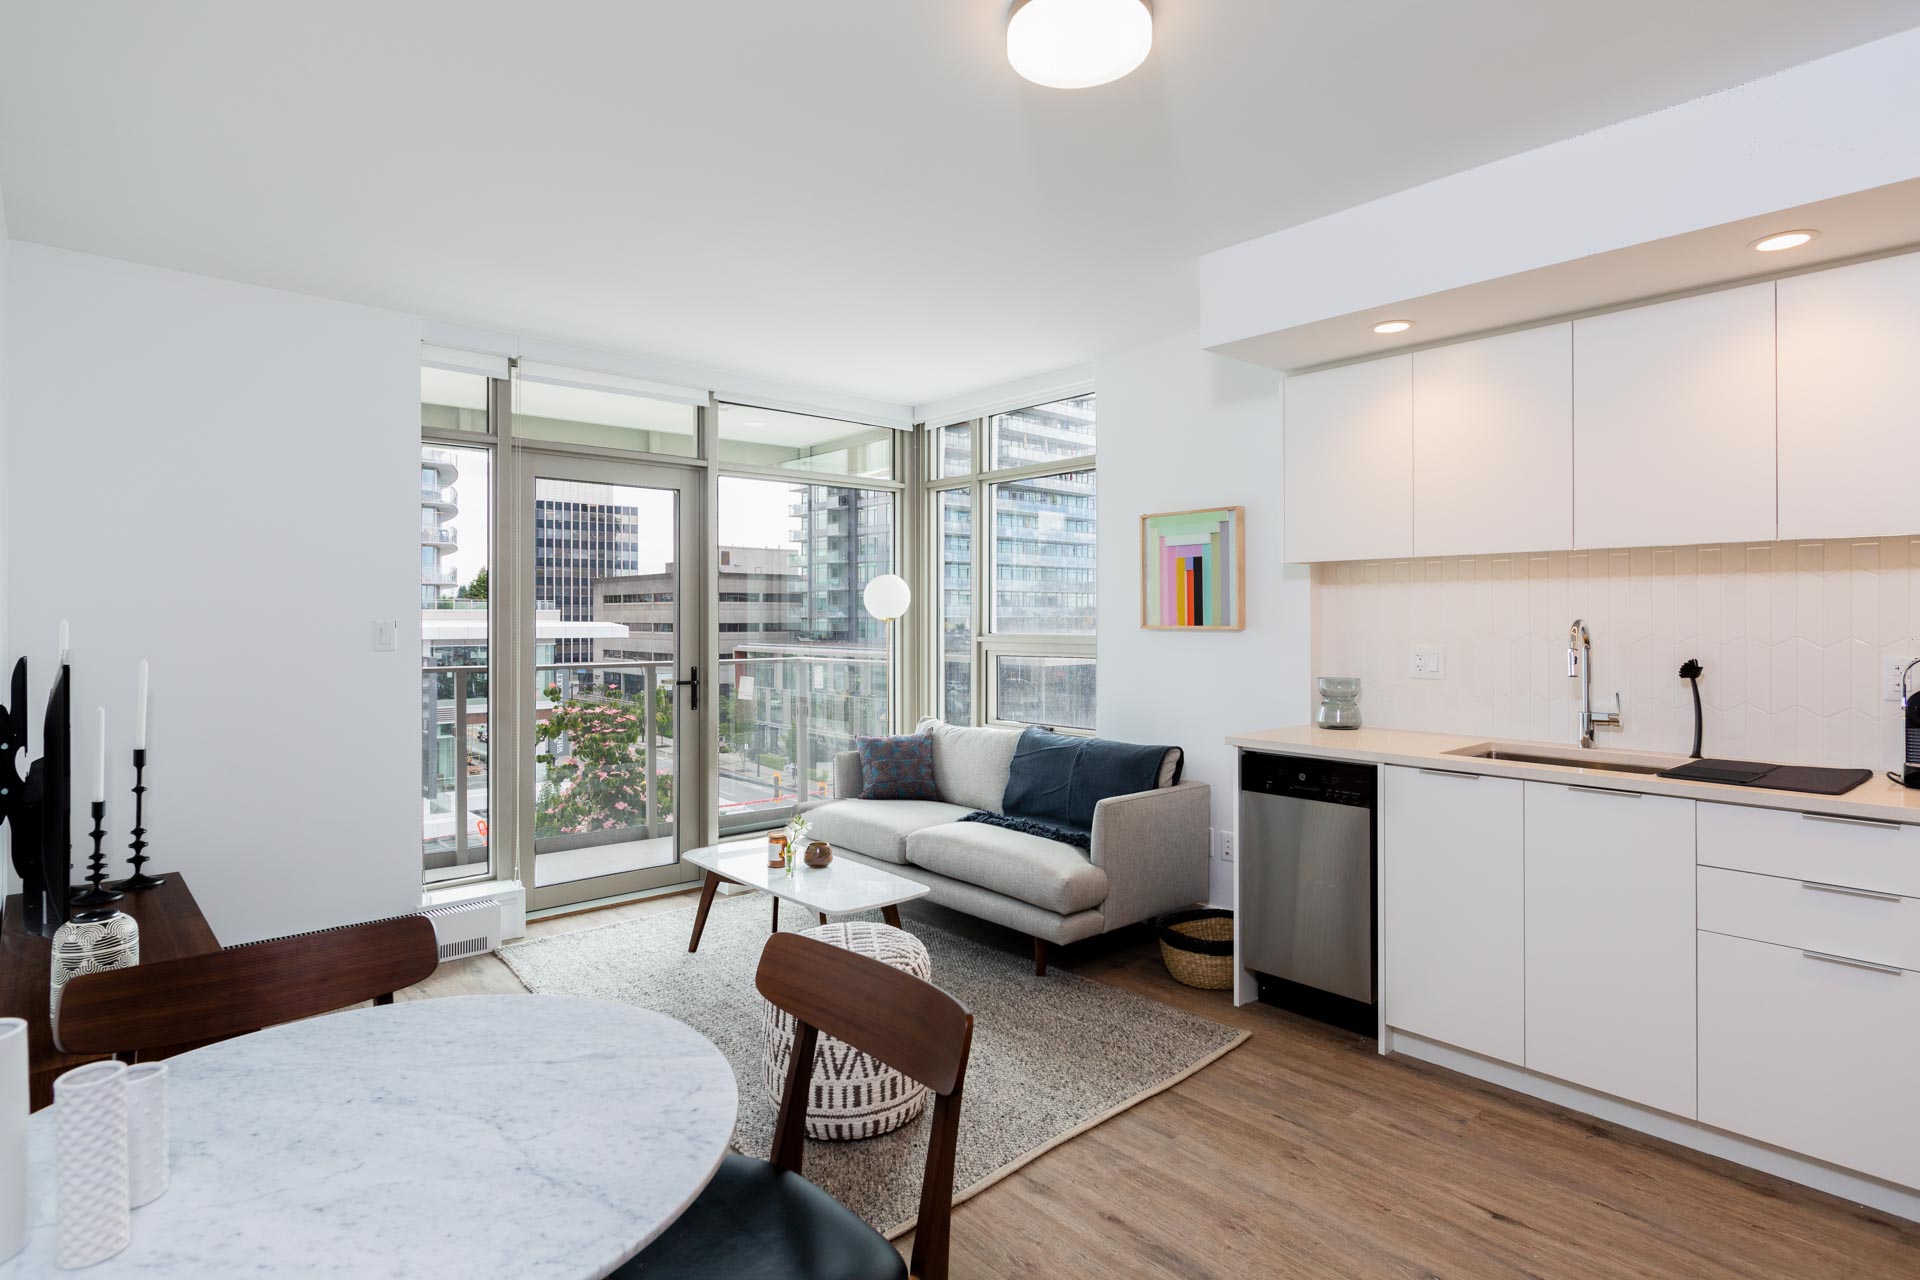 Unit #409 in The Lonsdale Rental Apartments